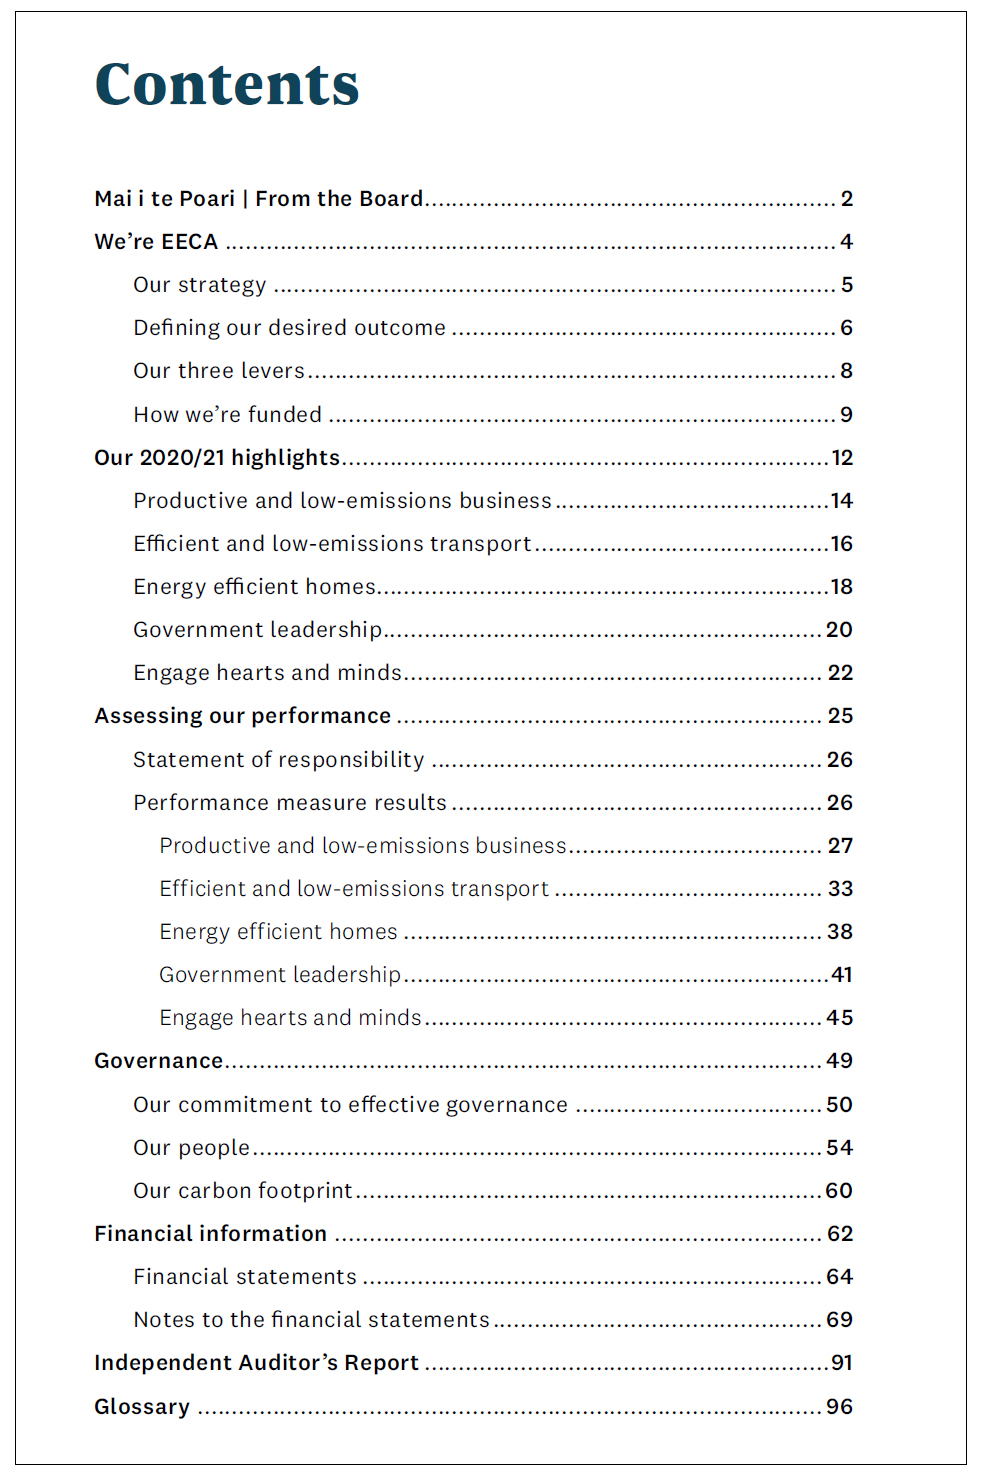 An image of the table of contents for the Energy Efficiency and Conservation Authority’s 2020/21 Annual Report.